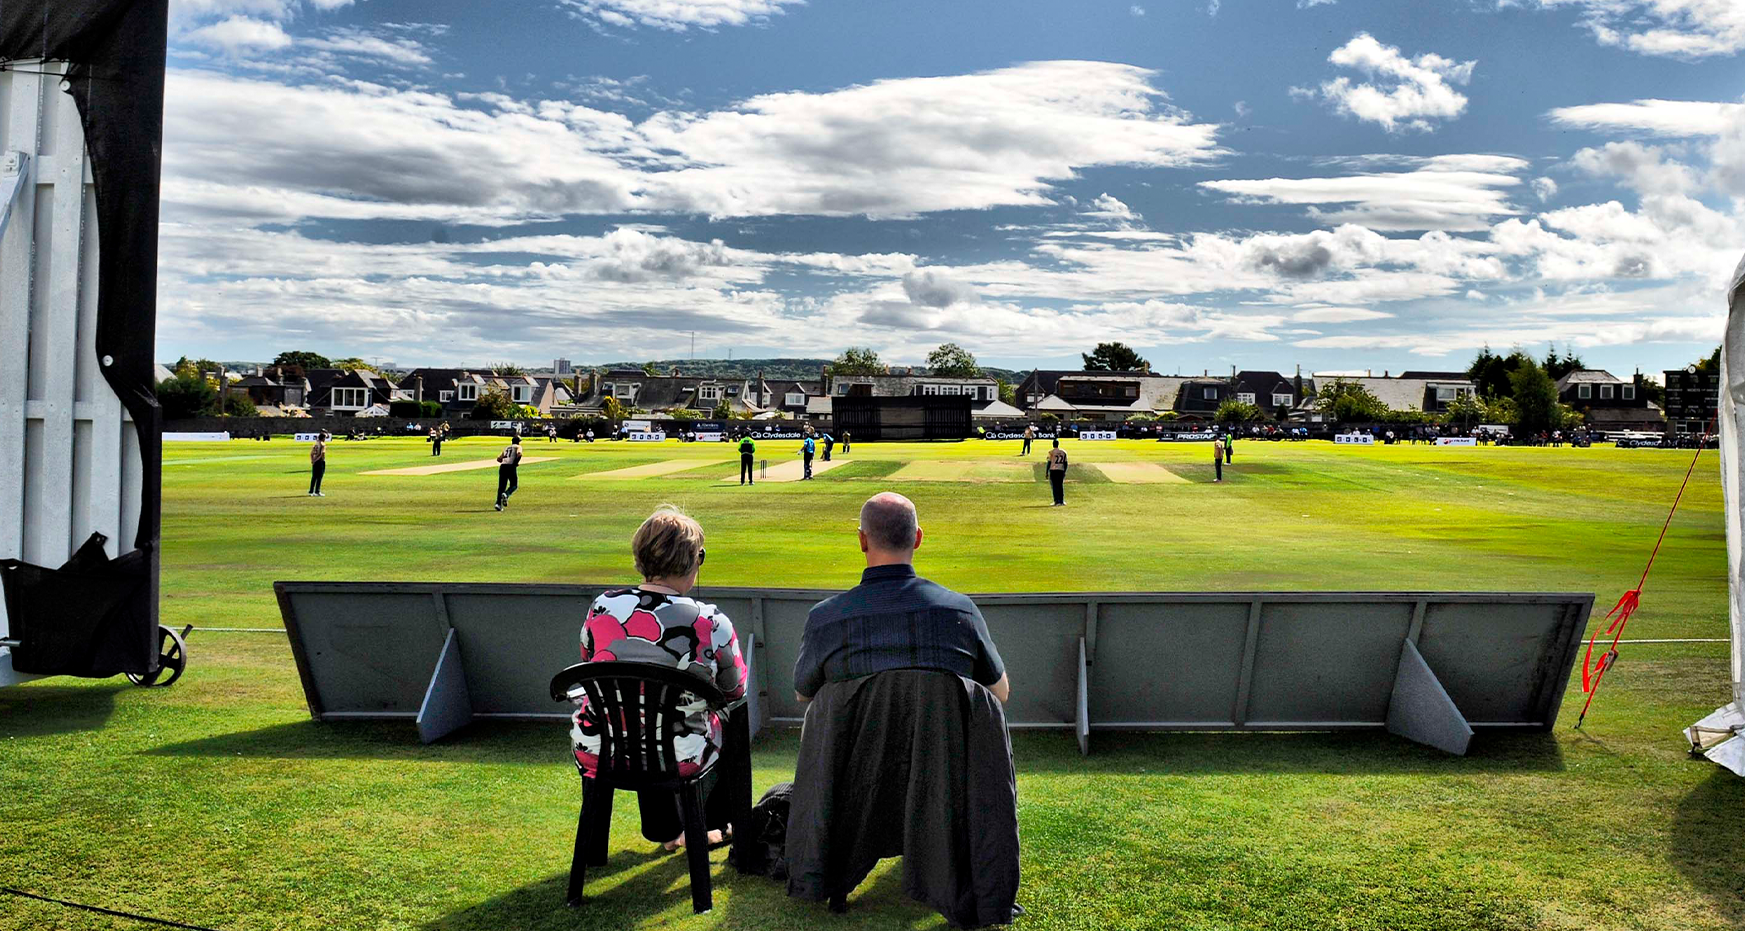 Scotland to host USA and UAE at Mannofield for the CWCL2 series in August 